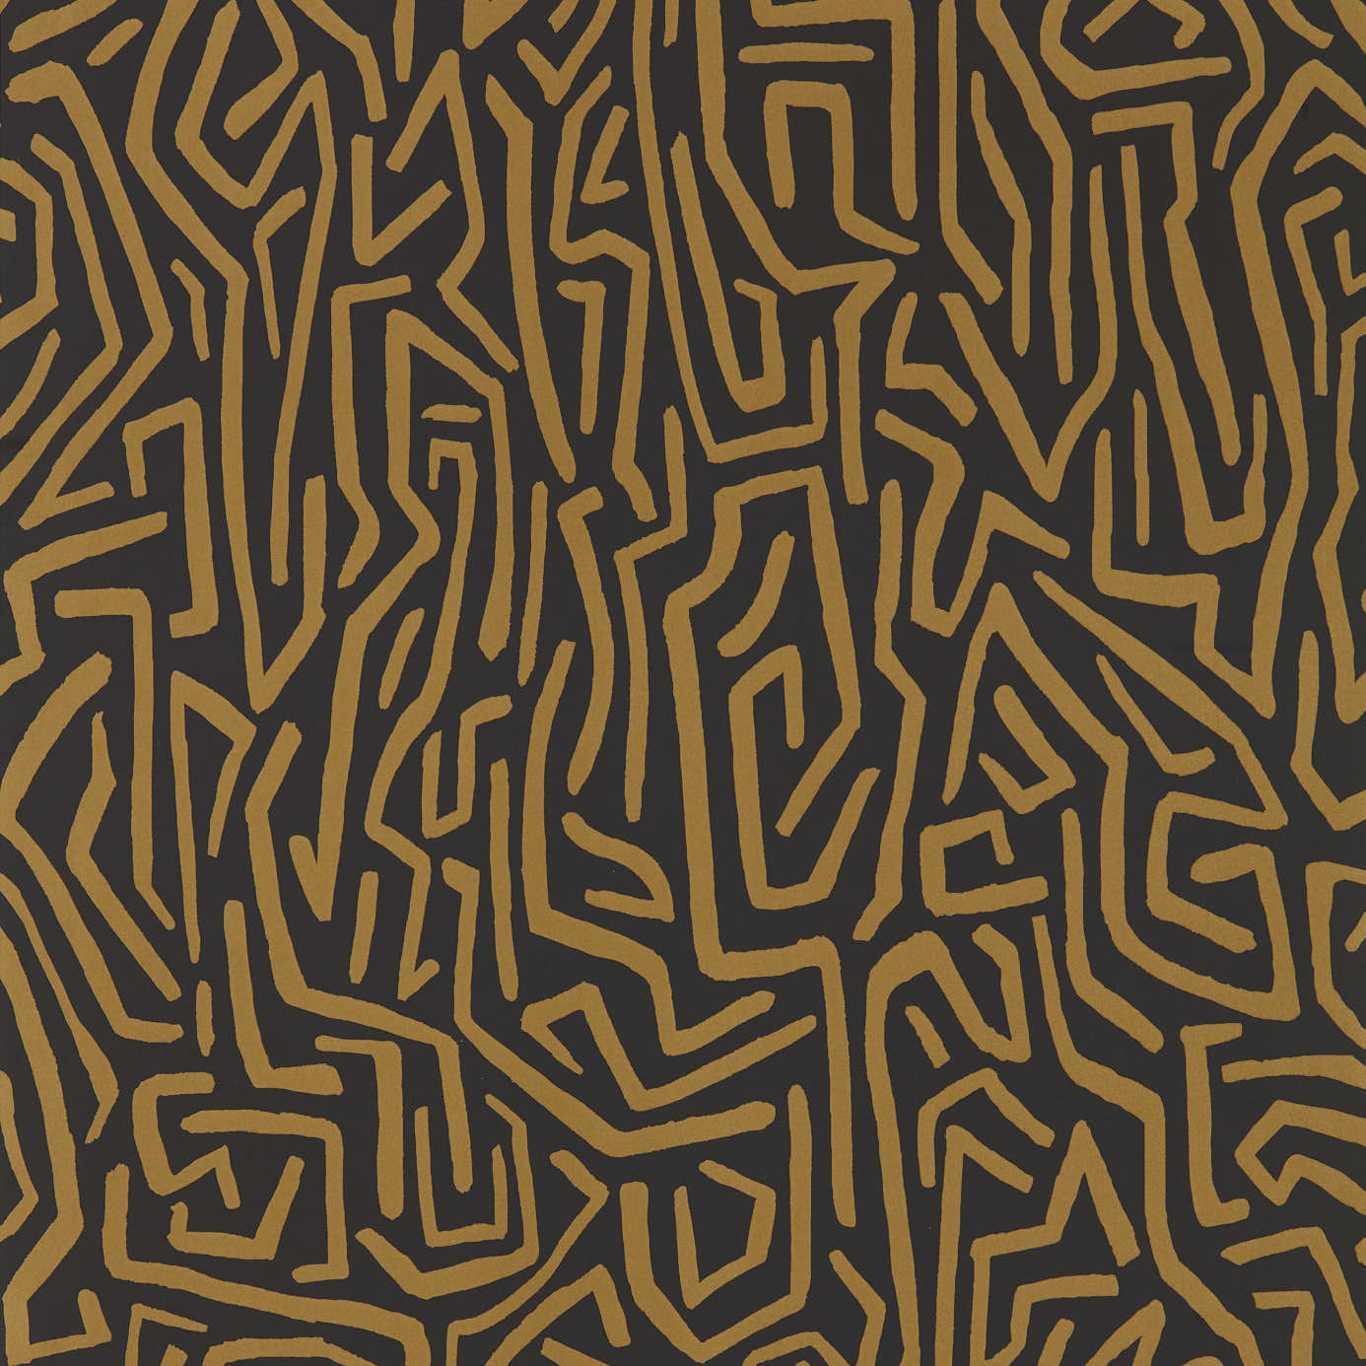 Melodic Gold/Black Earth Wallpaper HQN2112829 by Harlequin